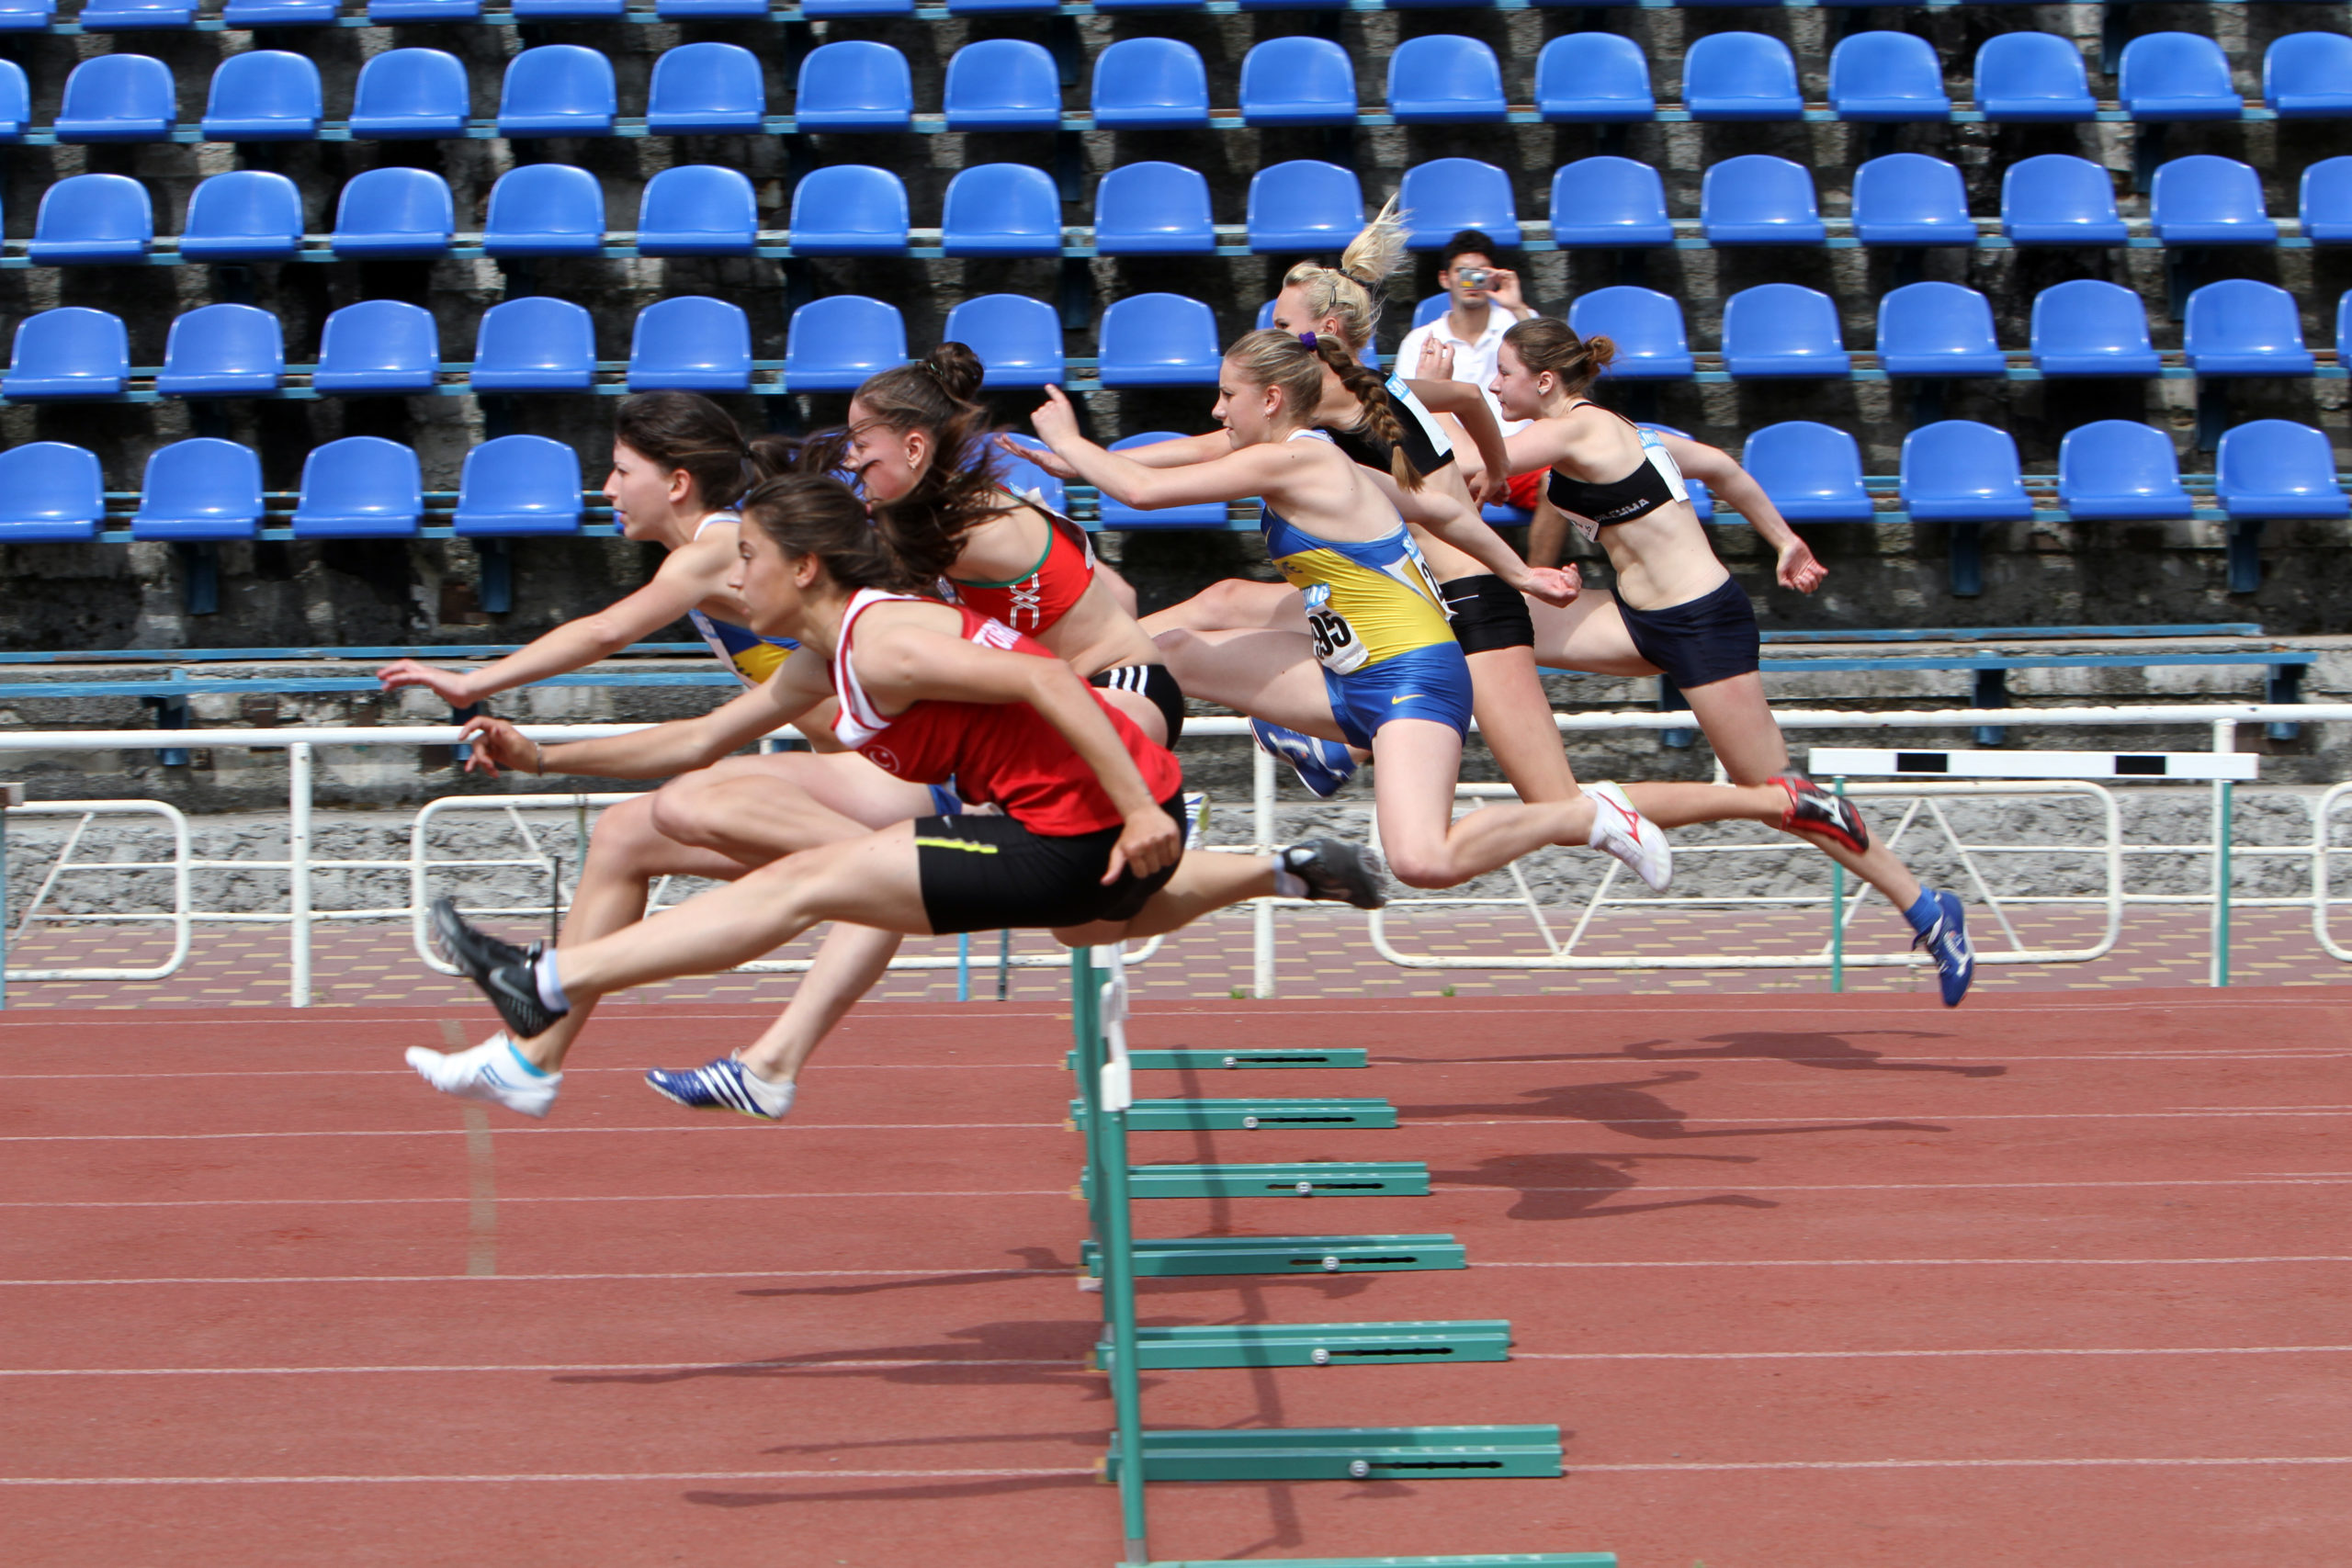 College track teams compete in a race, going over hurdles, thankful their sports injury claims are covered if they are injured. 